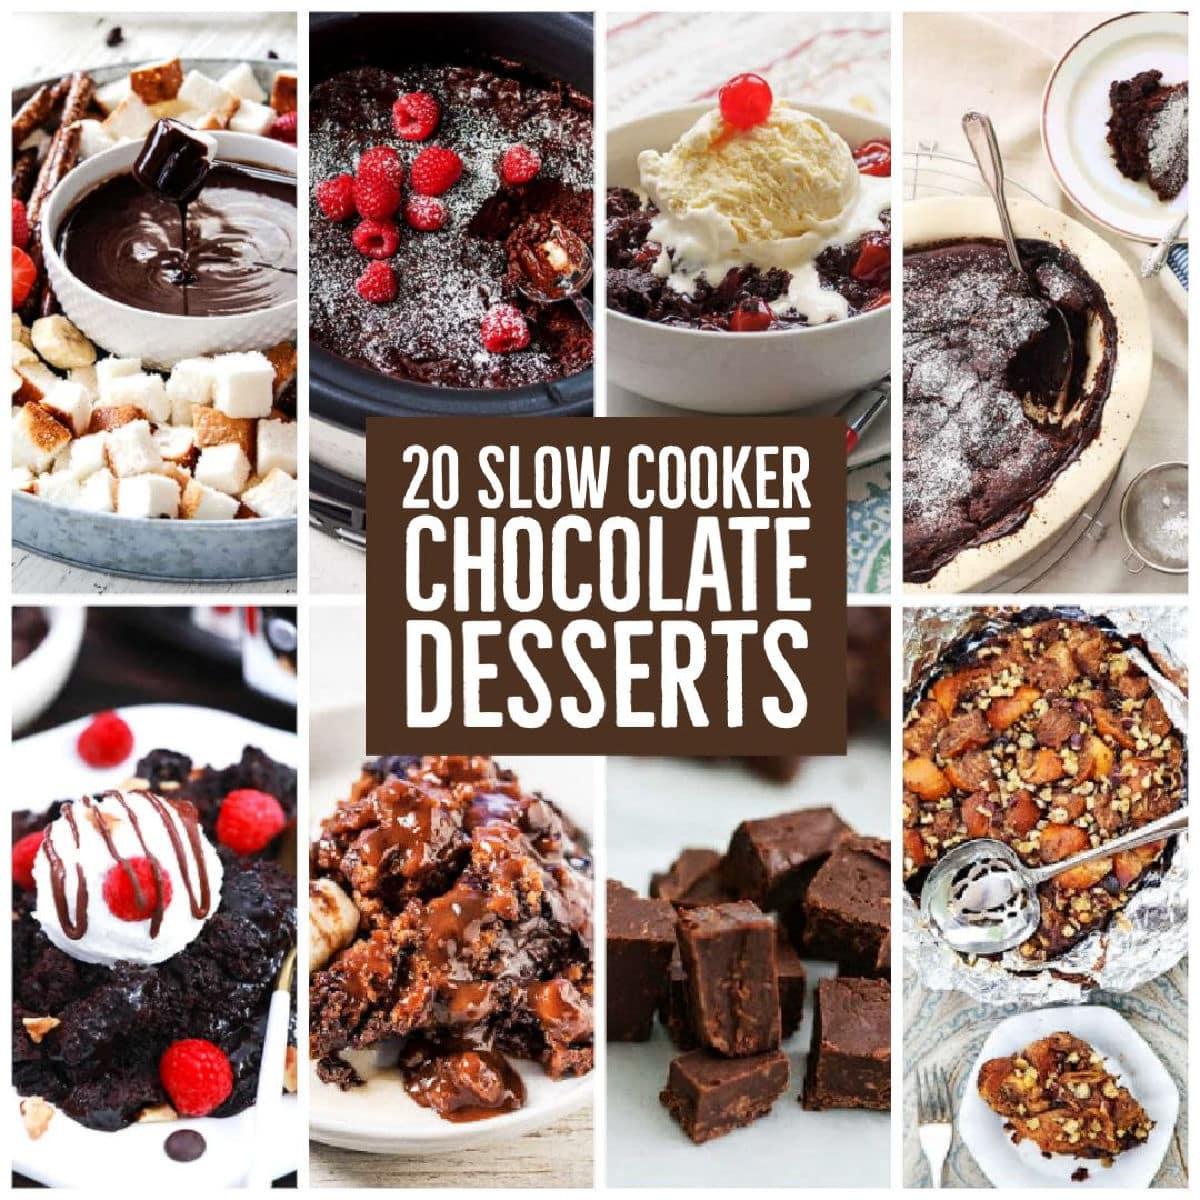 20 Slow Cooker Chocolate Desserts text overlay collage of featured recipes.